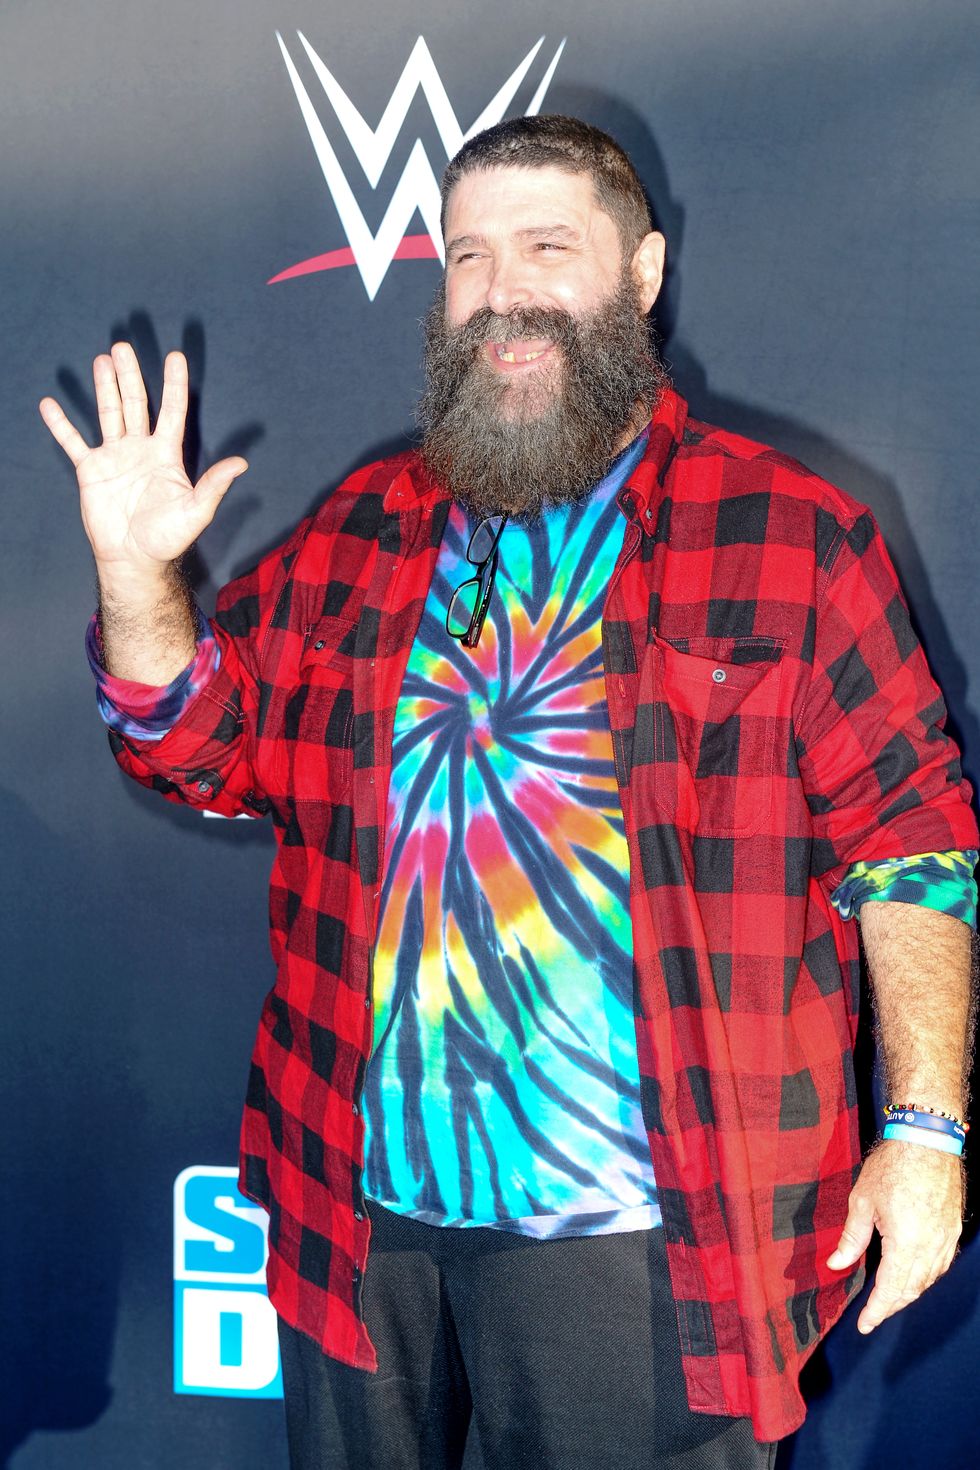 Mick Foley in 2019 wearing a tie-dye shirt like his character, Dude Love